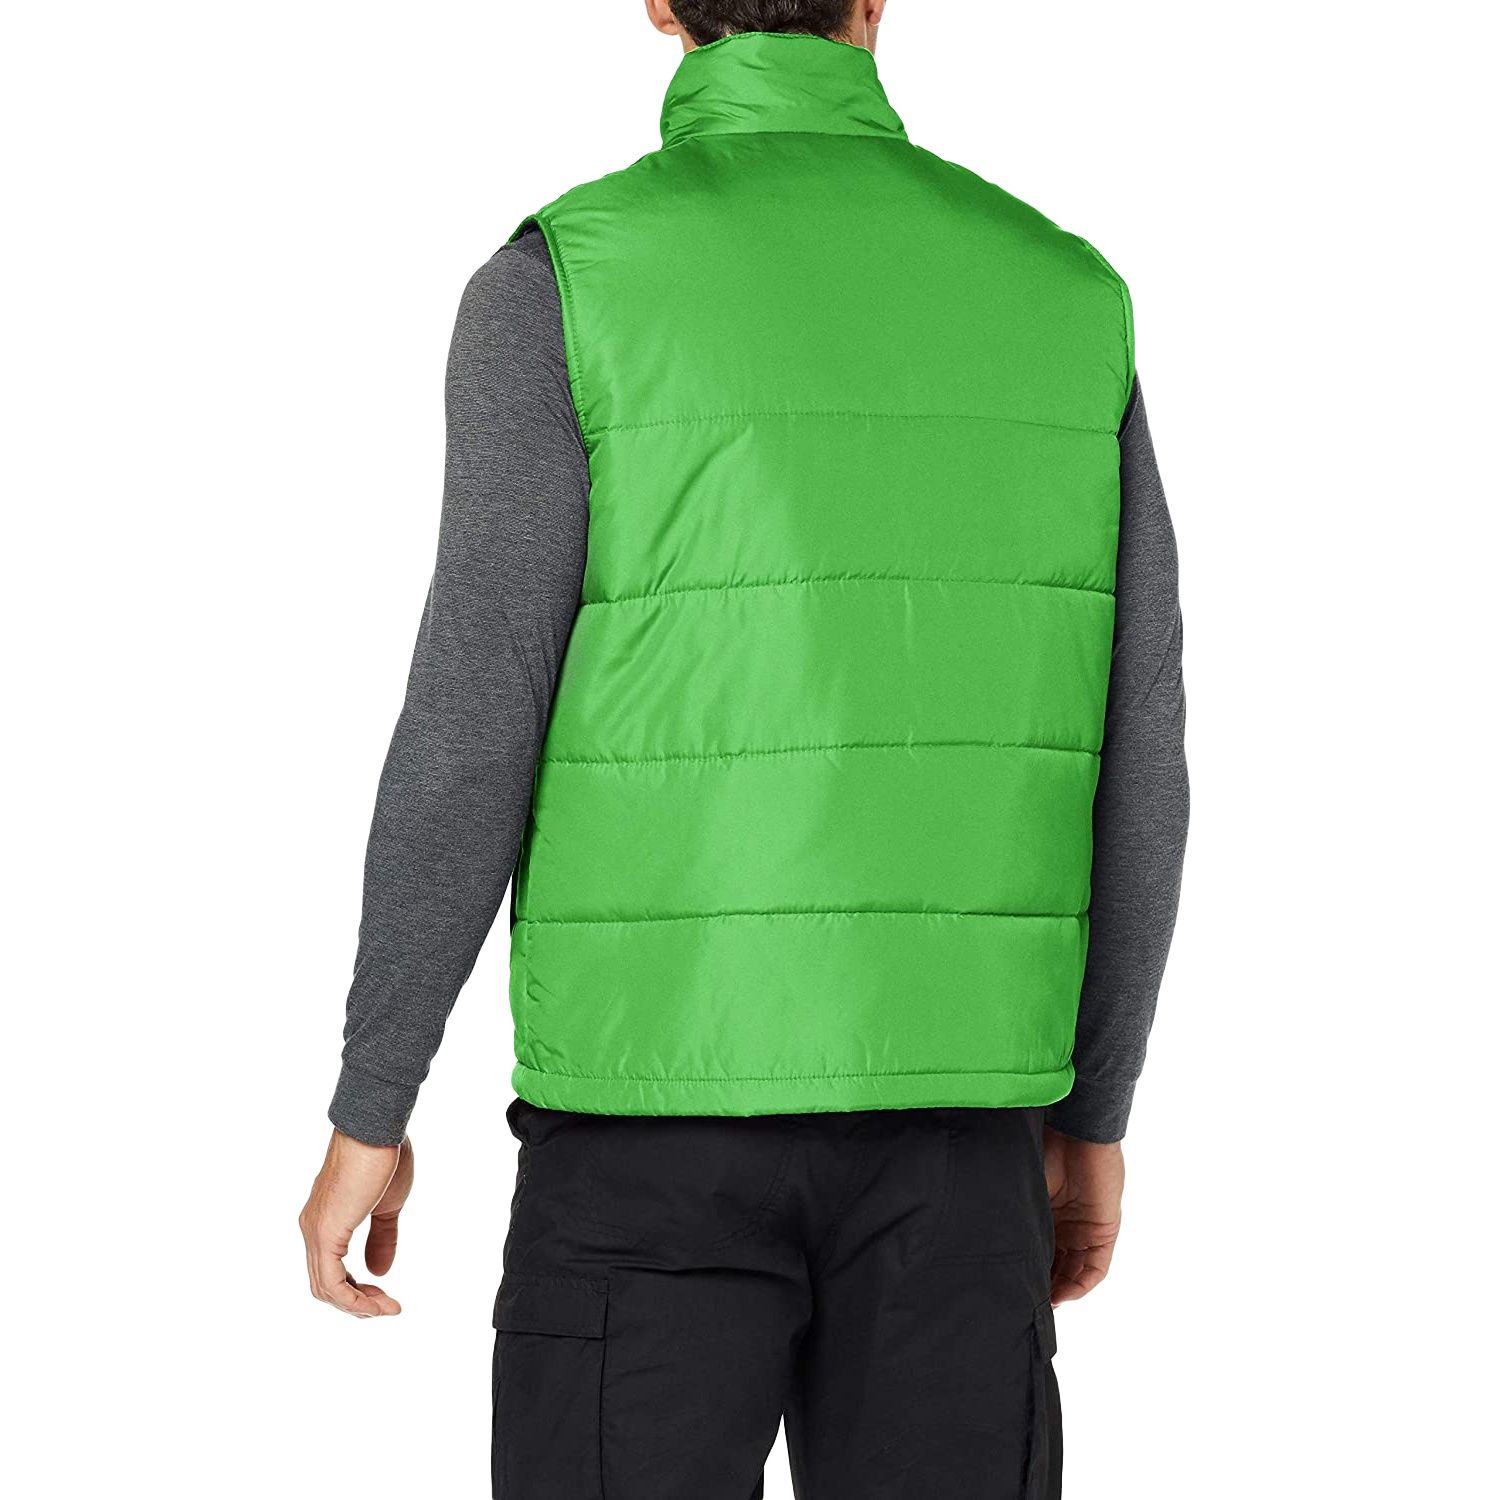 100% Polyester. Quilted water repellent polyester micro poplin. Thermo-Guard insulation. 180gsm body insulation wadding weight. Polyester taffeta lining. 2 lower pockets.